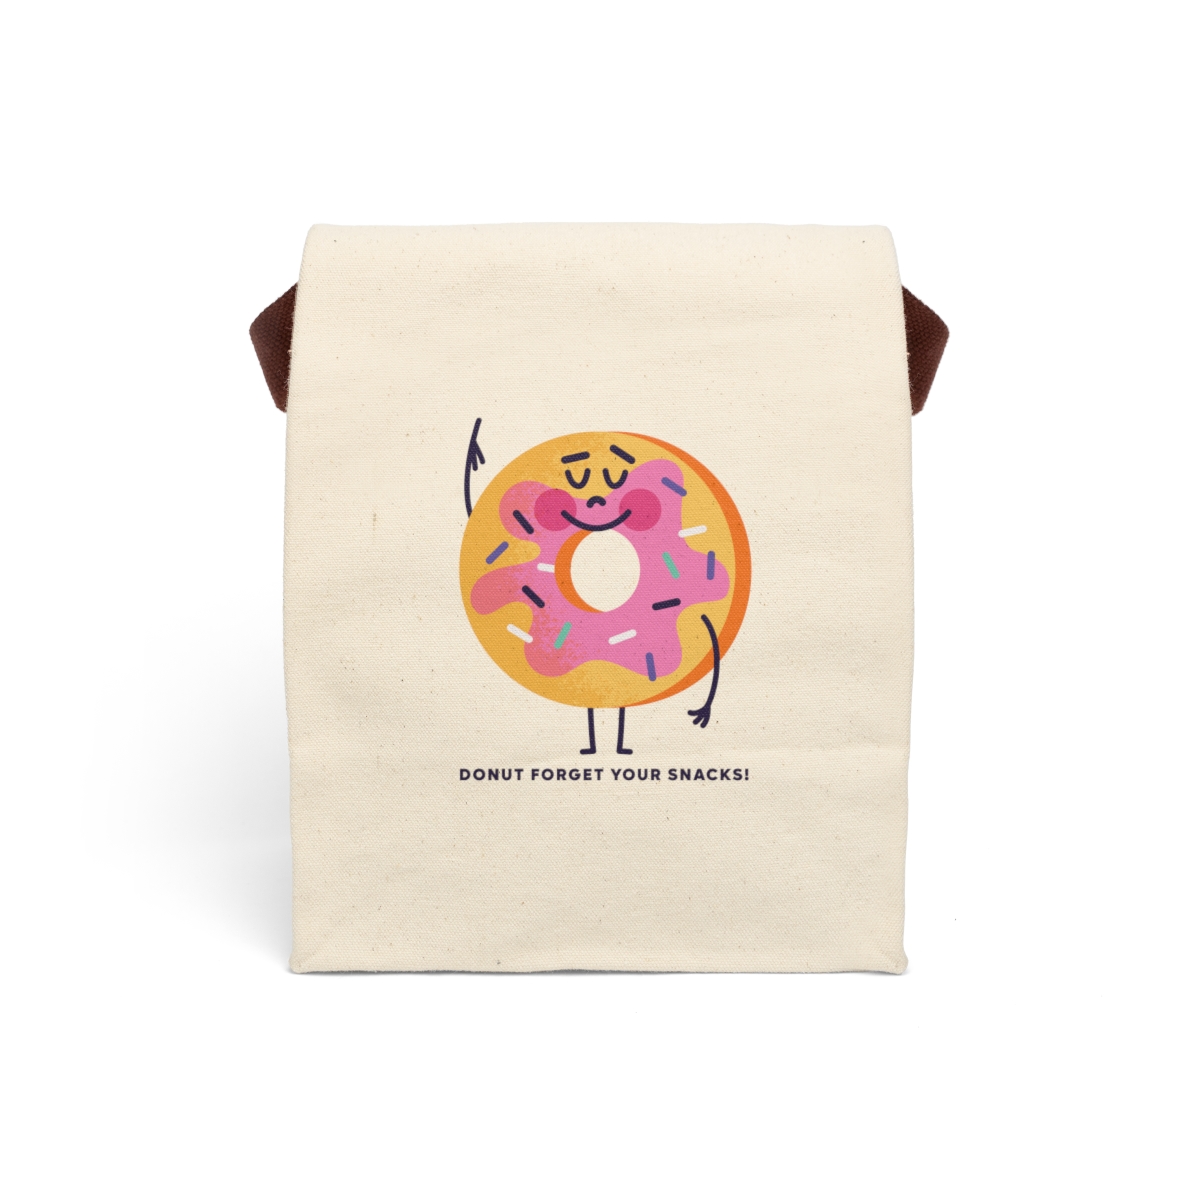 Featured image for “Snack Bag Donut Forget Your Snacks”